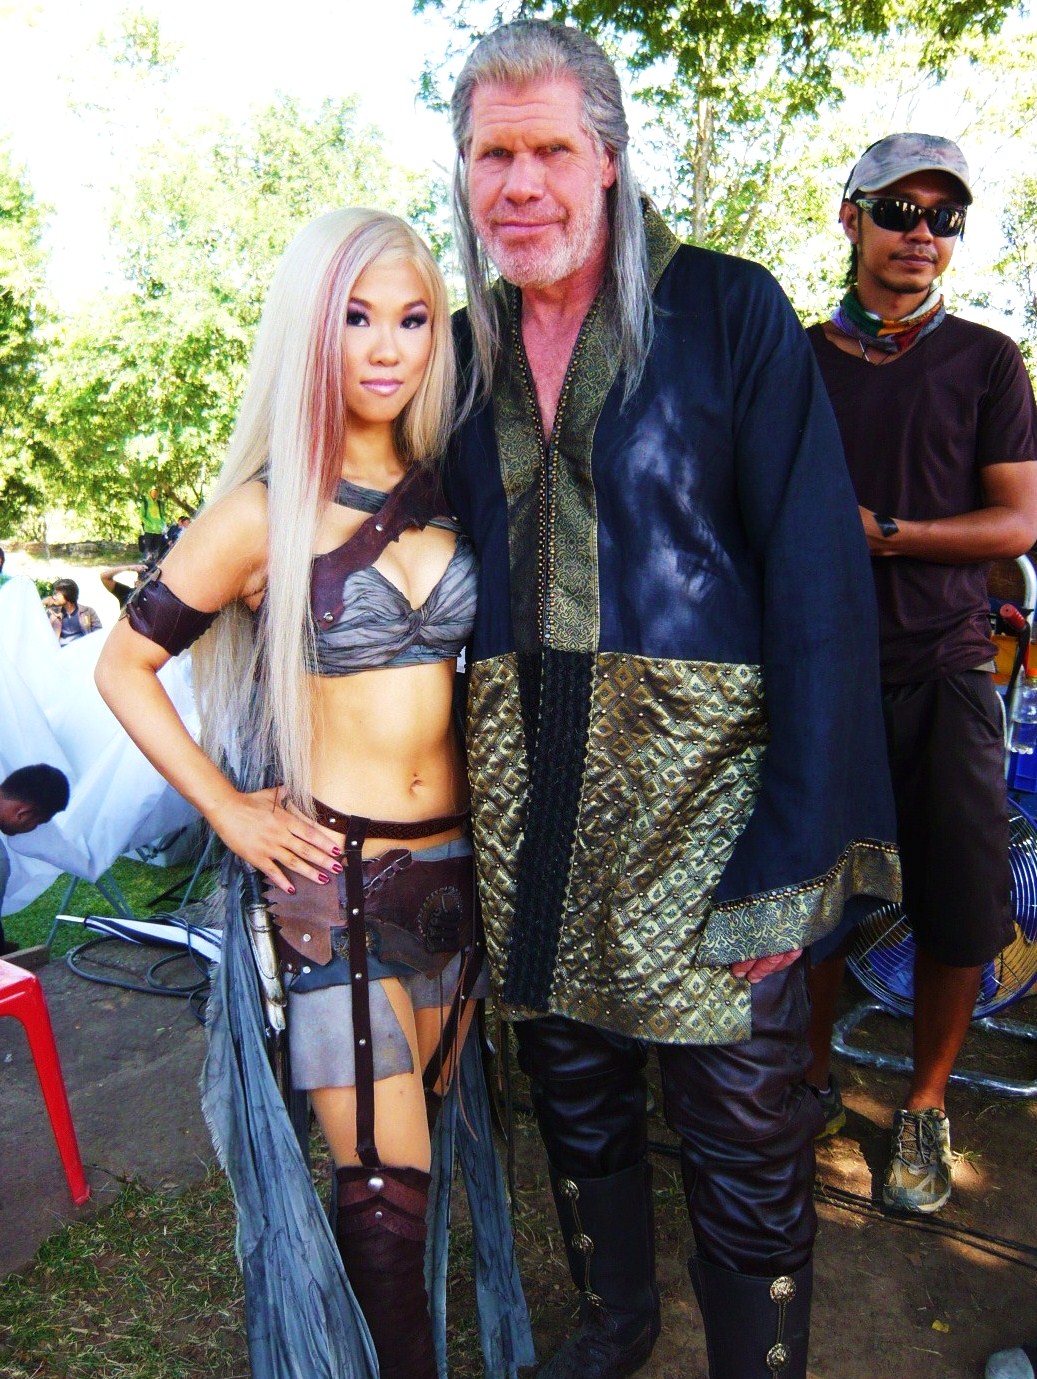 Selina Lo, Ron Perlman 'Scorpion King: Battle for Redemption'